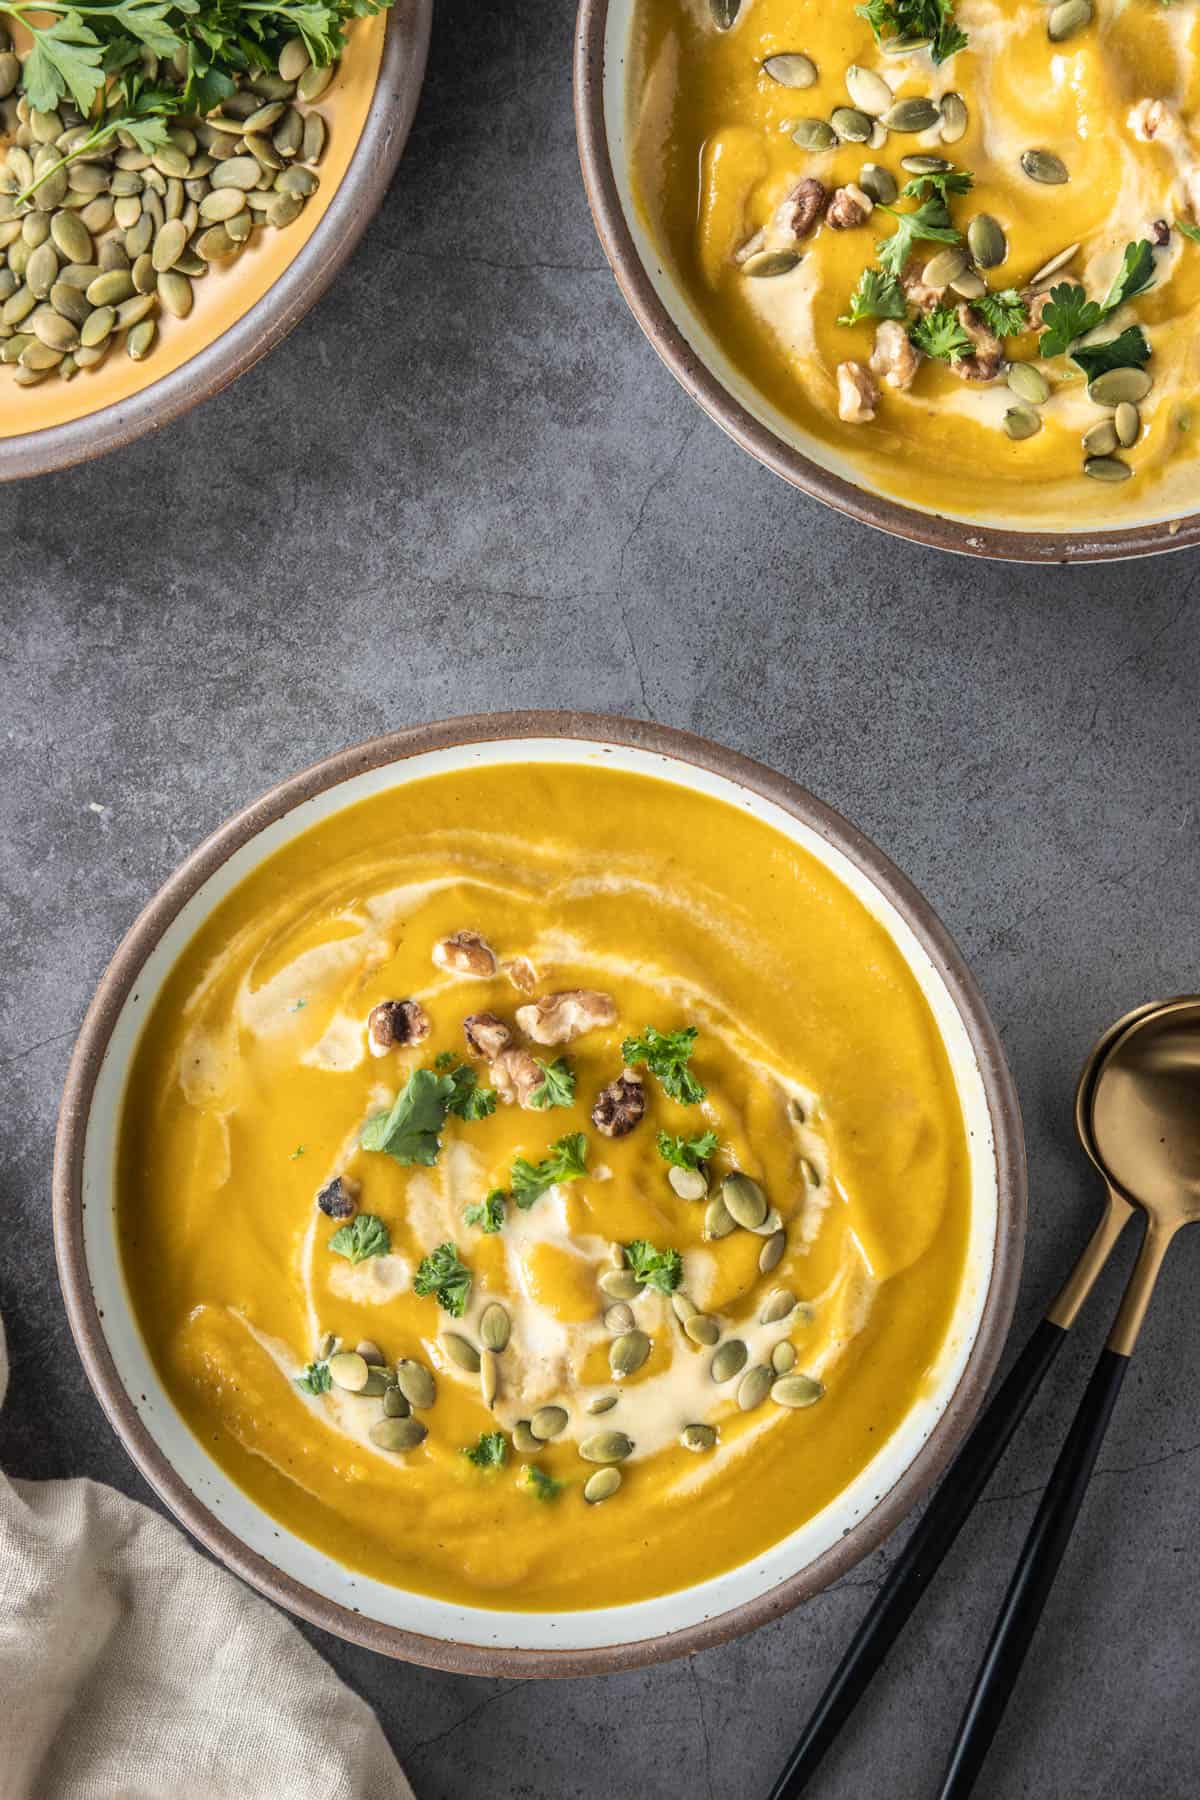 Two bowls of pumpkin soup with garnishes in the background